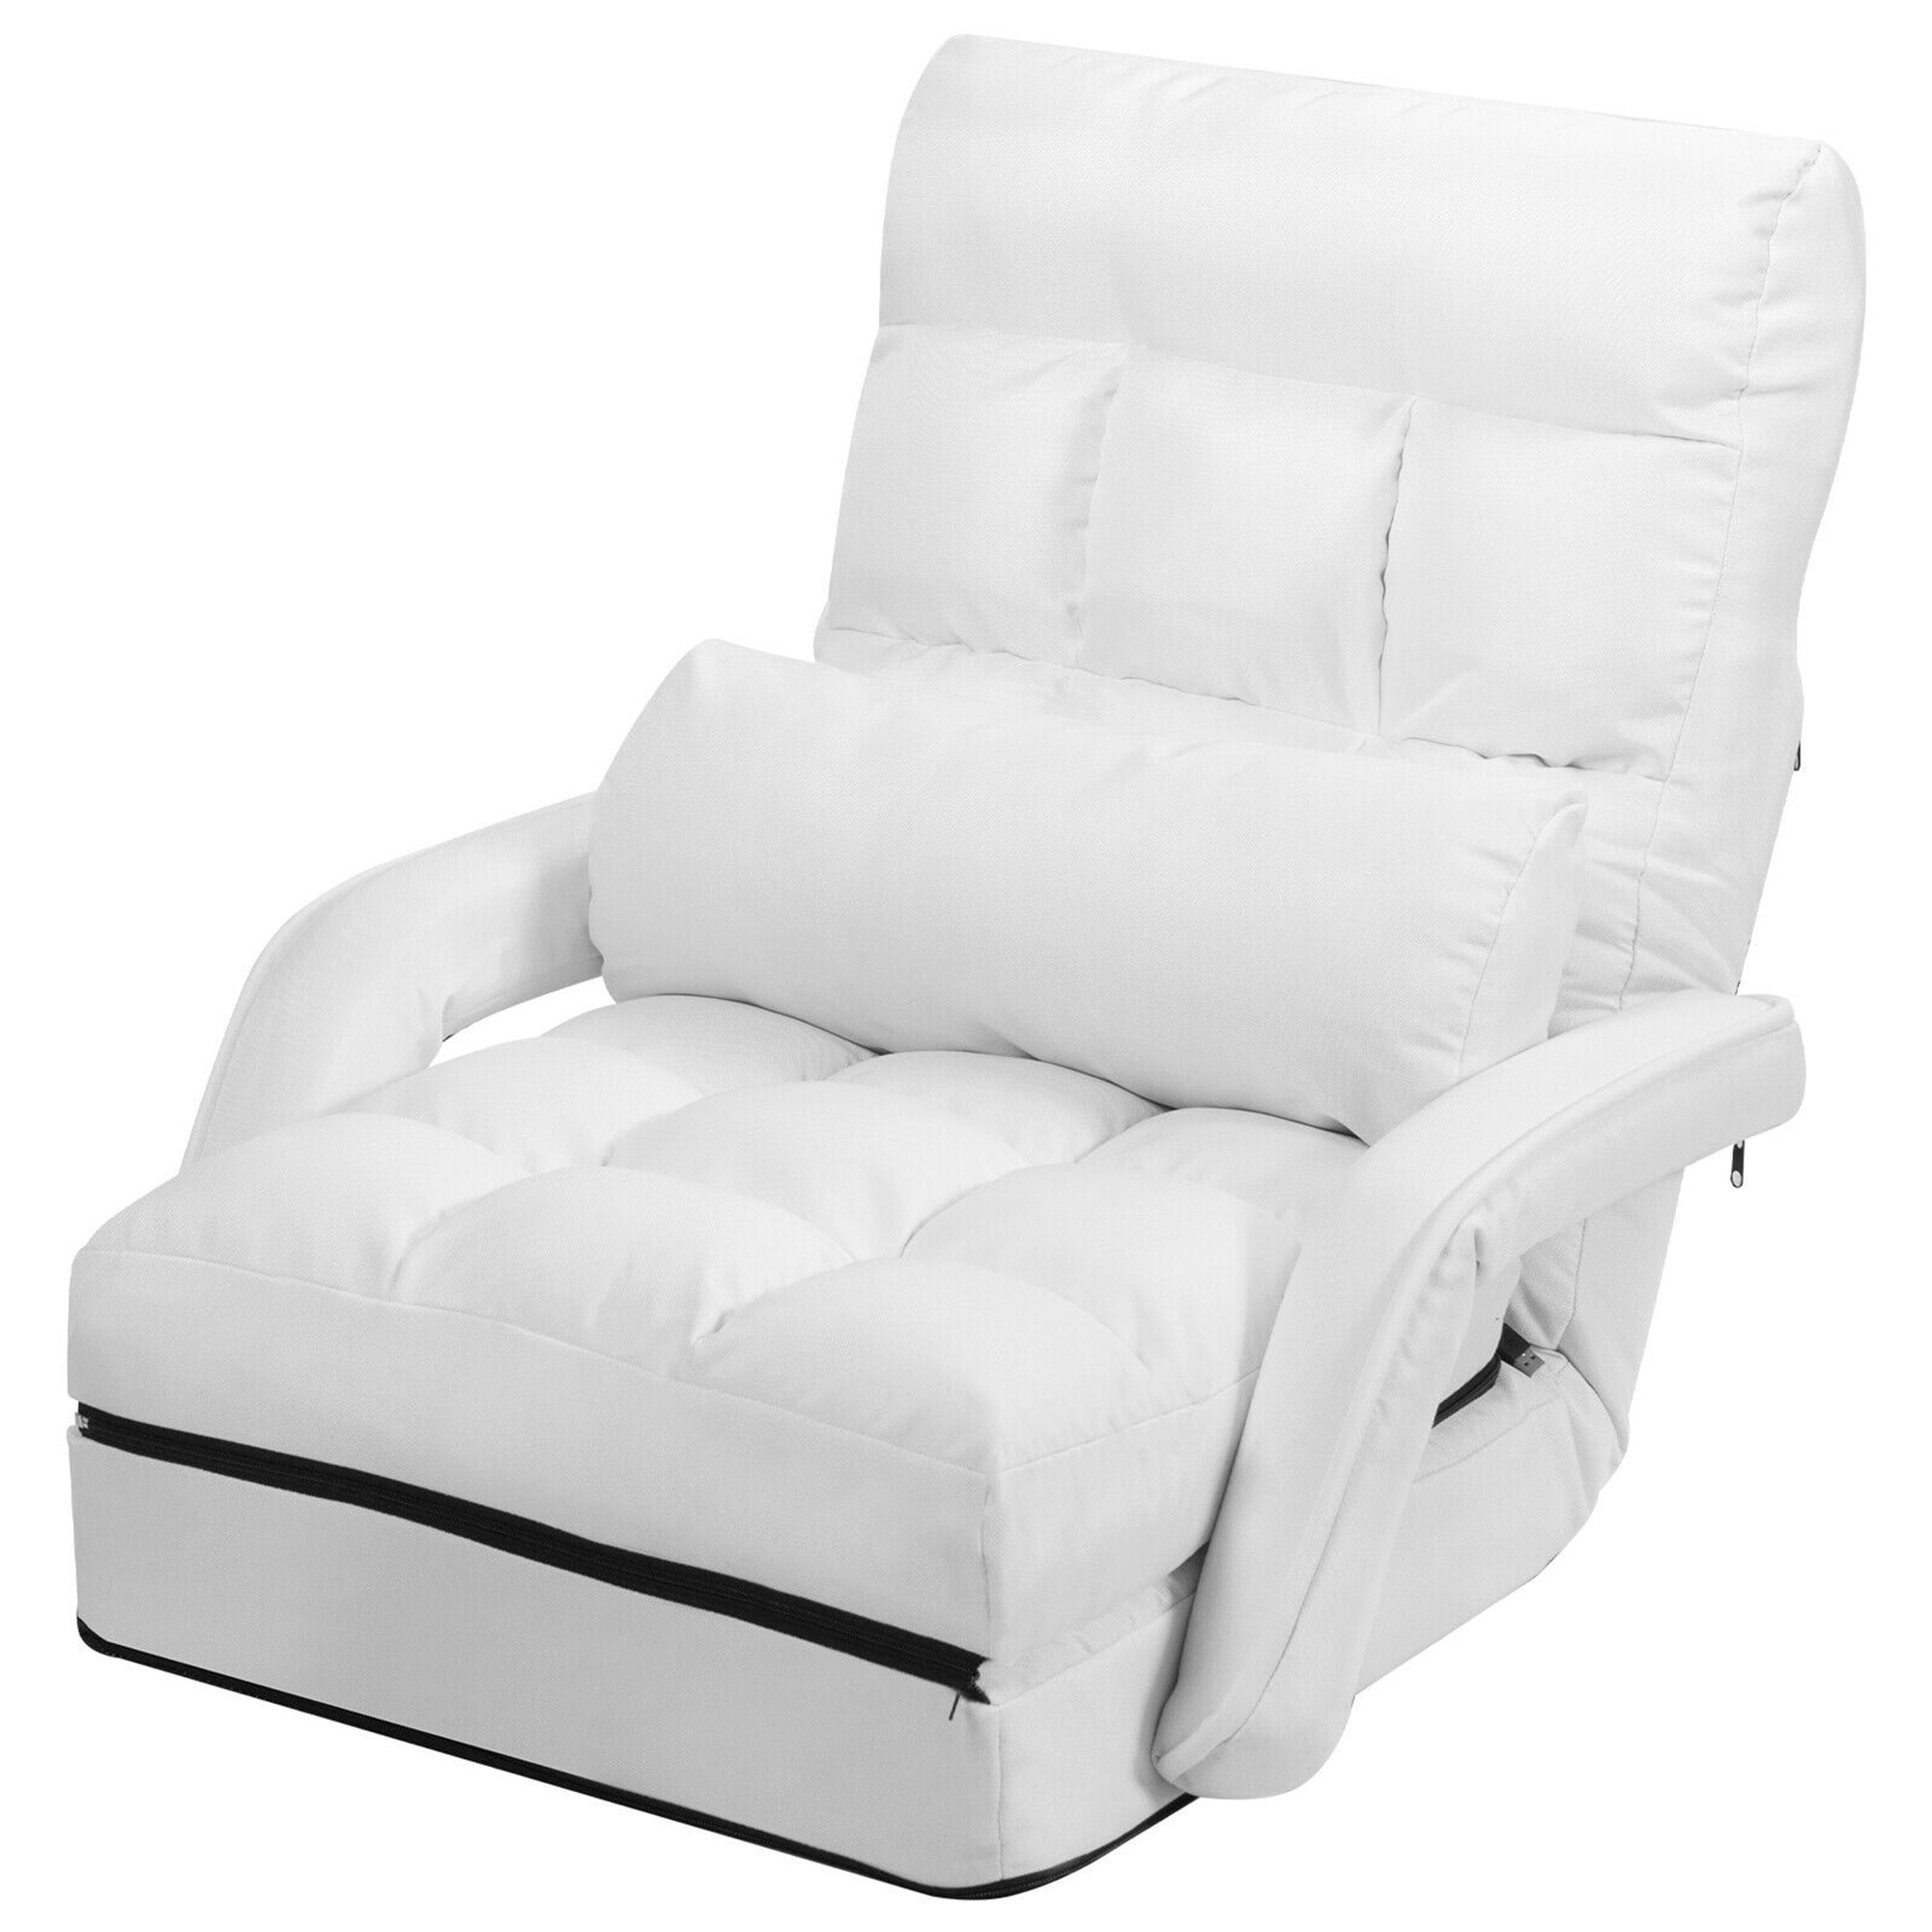 https://ak1.ostkcdn.com/images/products/is/images/direct/d734bd132d5393e7c002a1cf7863bb3edcf2852a/Gymax-White-Folding-Lazy-Sofa-Floor-Chair-Sofa-Lounger-Bed-with.jpg